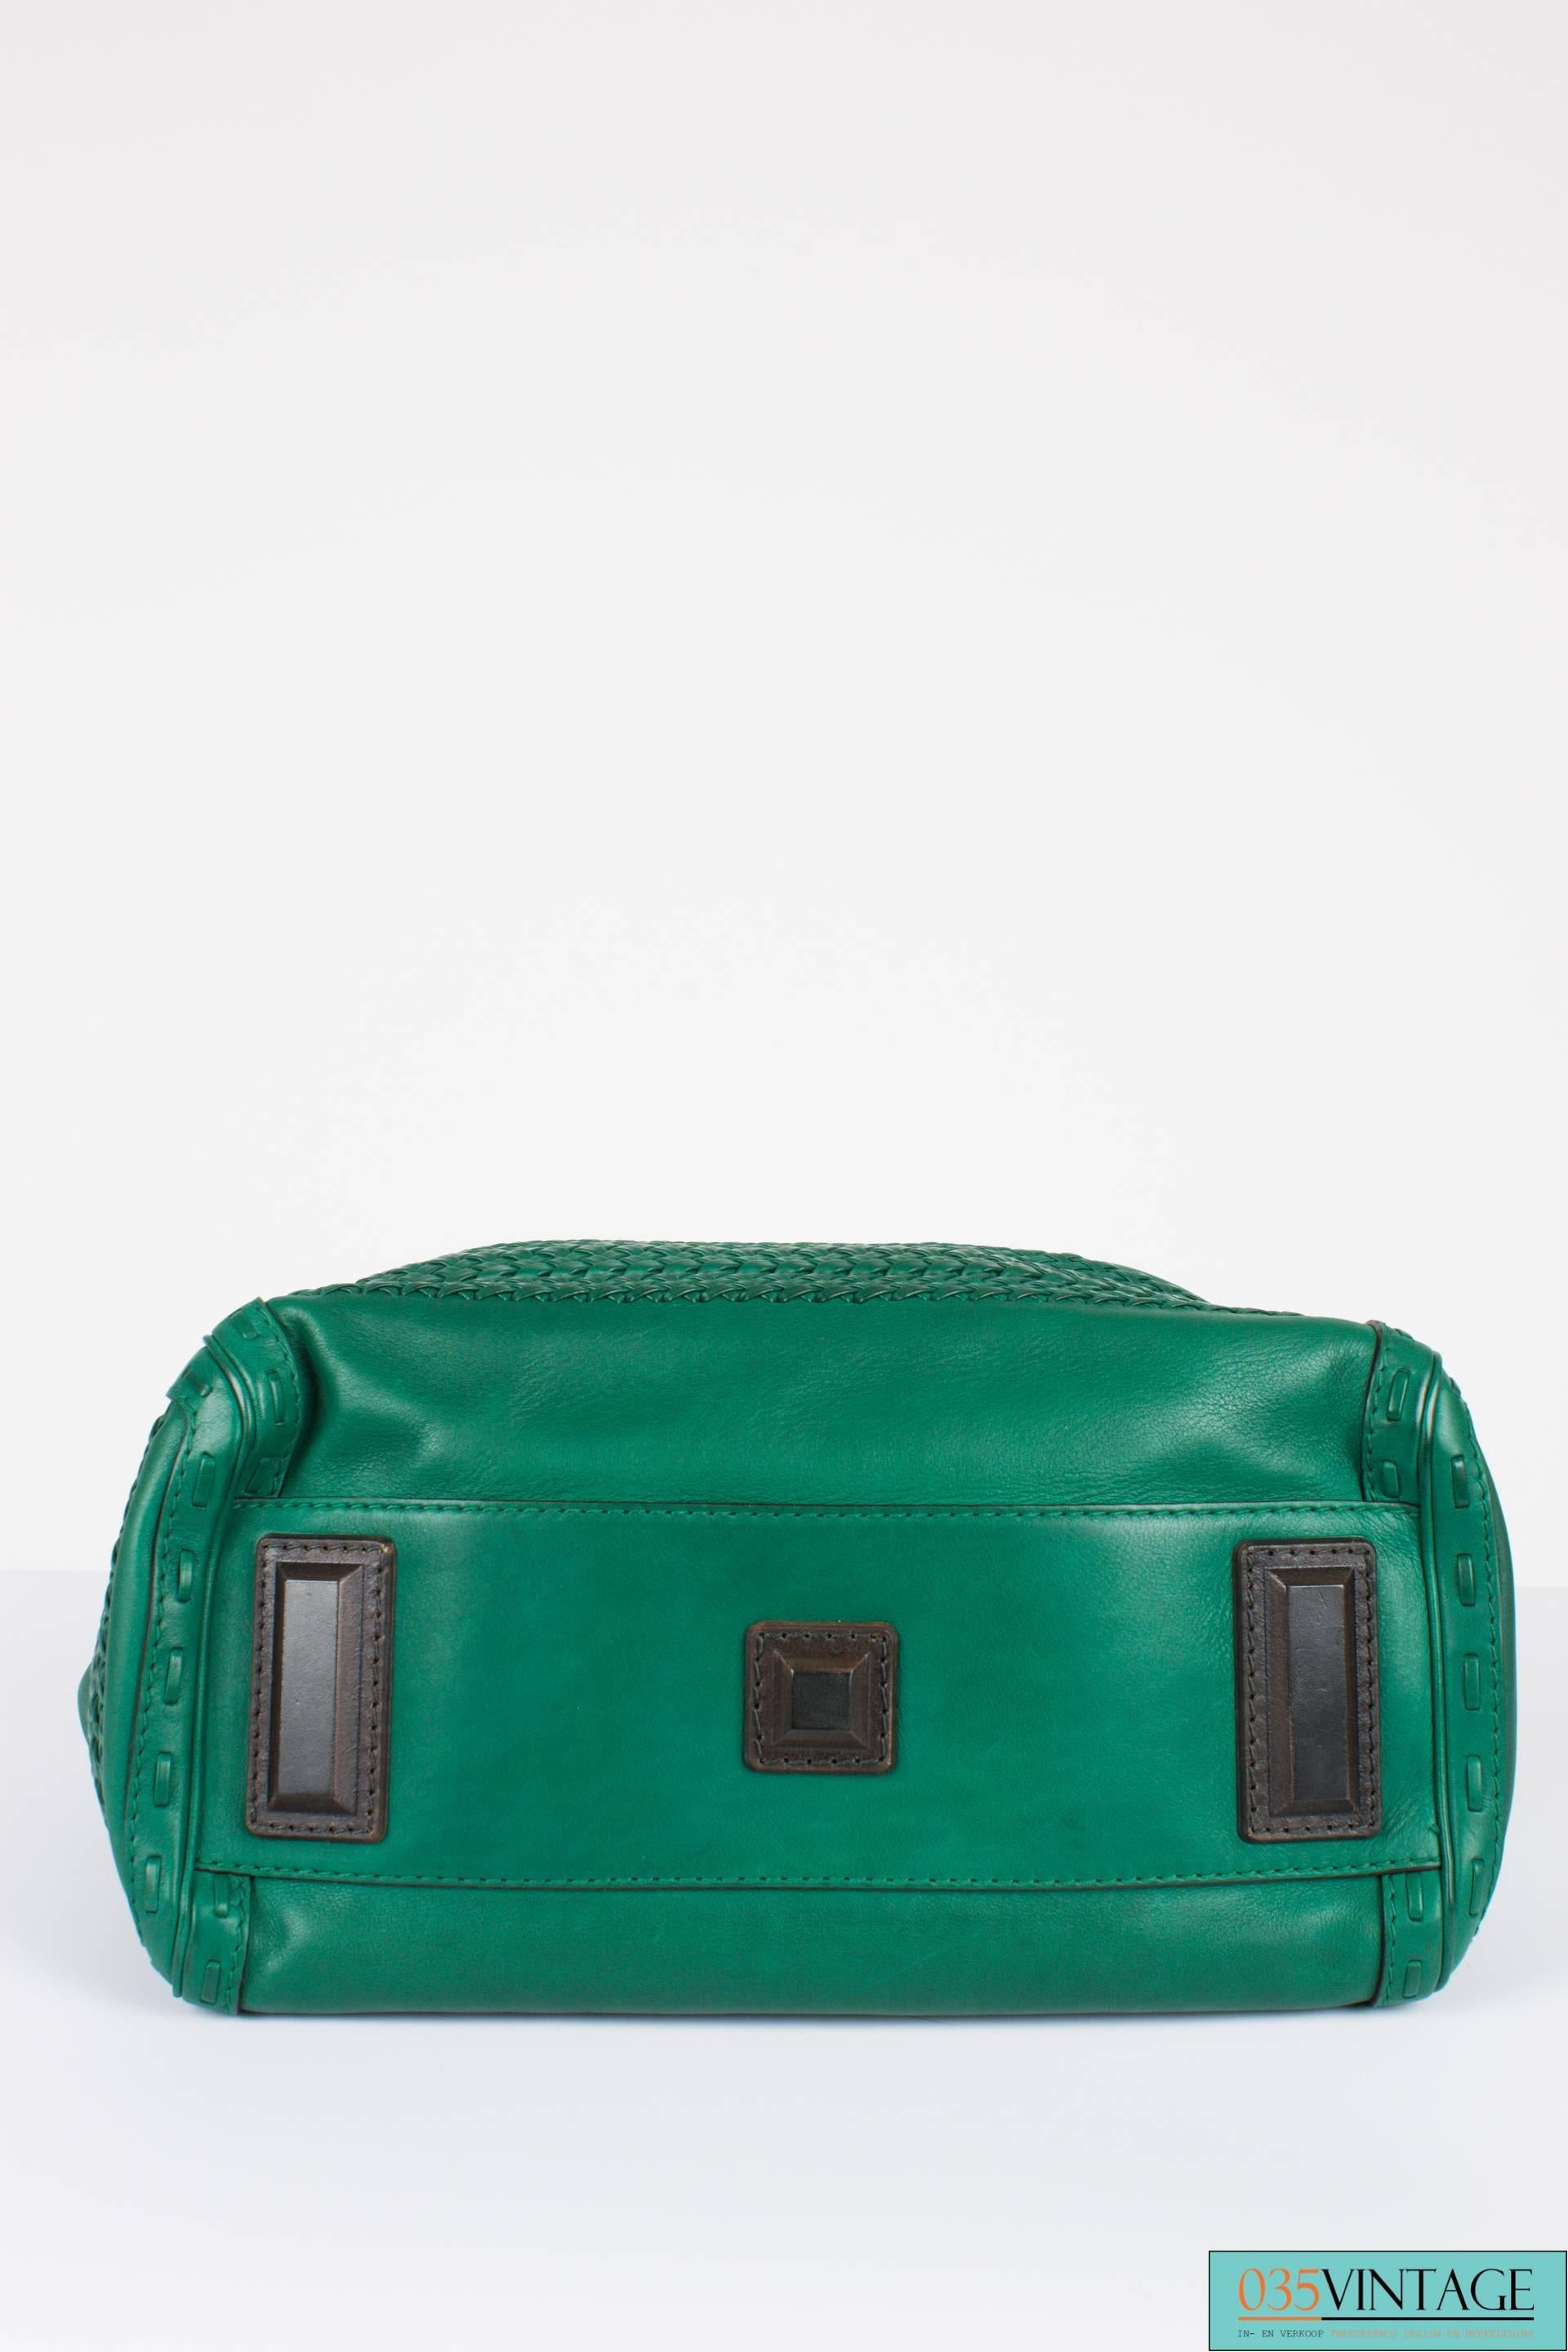 The minute you see this bag, you want it! Beautifully handmade Gucci bag in emerald green leather.

This one is called the Gucci Medium Handmade Woven Double Handle Bag and it has a rather big size; 35 centimeters wide, 27 centimeters high and 16